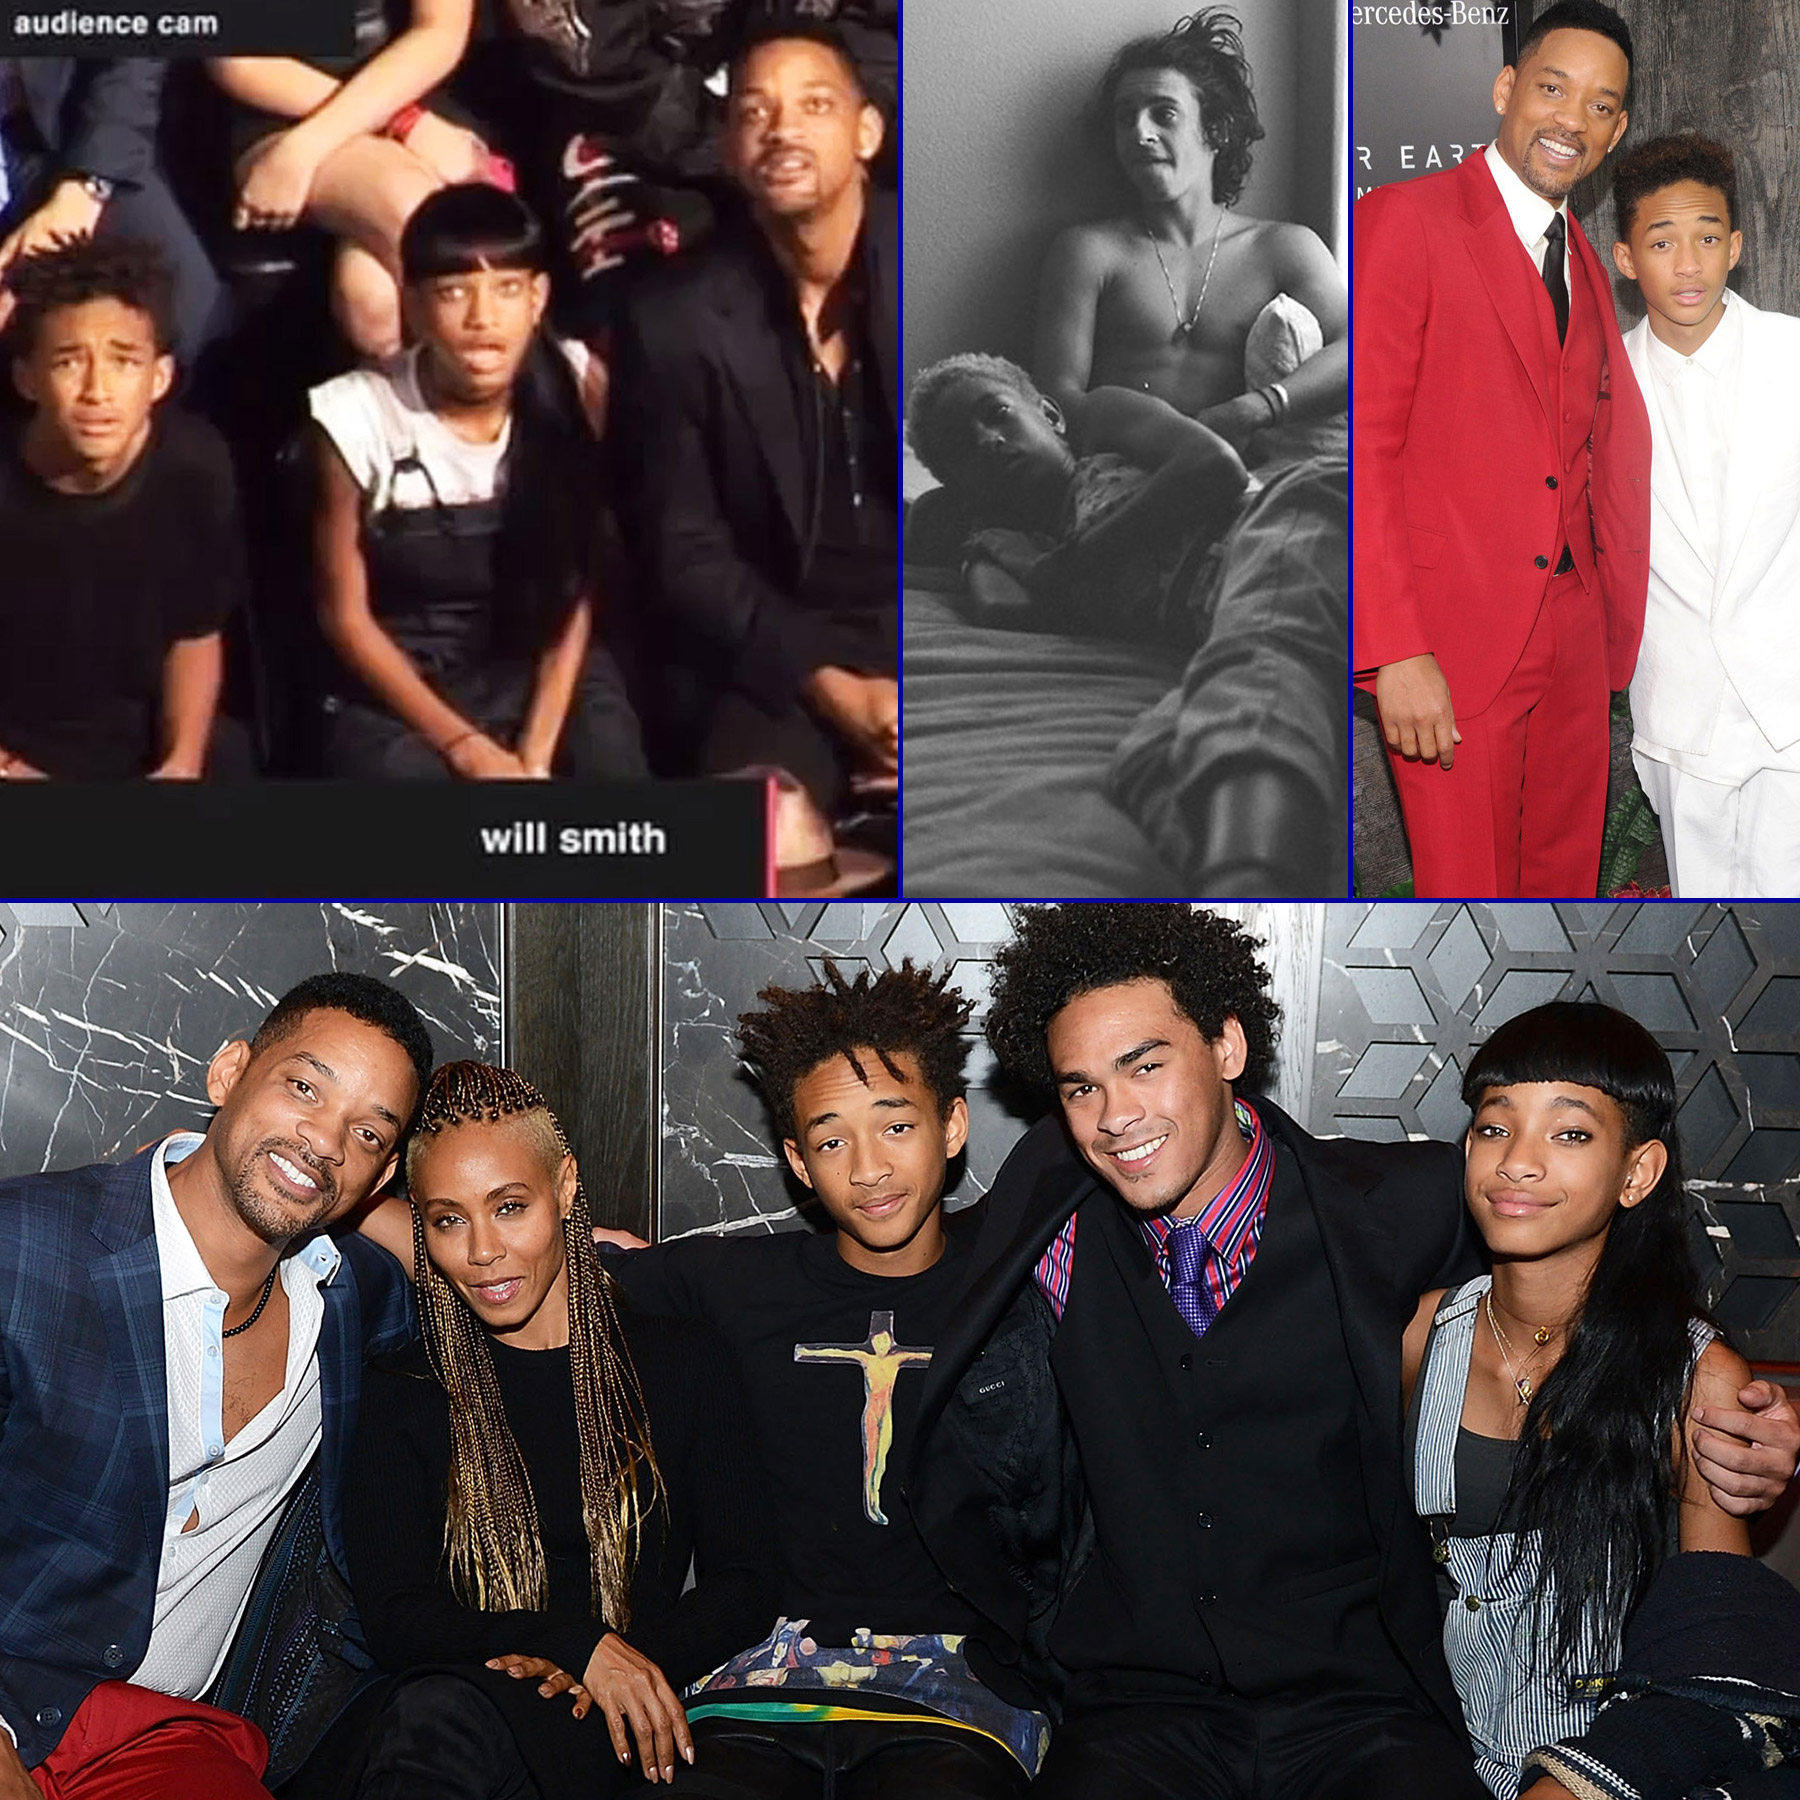 pictures of will smith son in the independence day movie